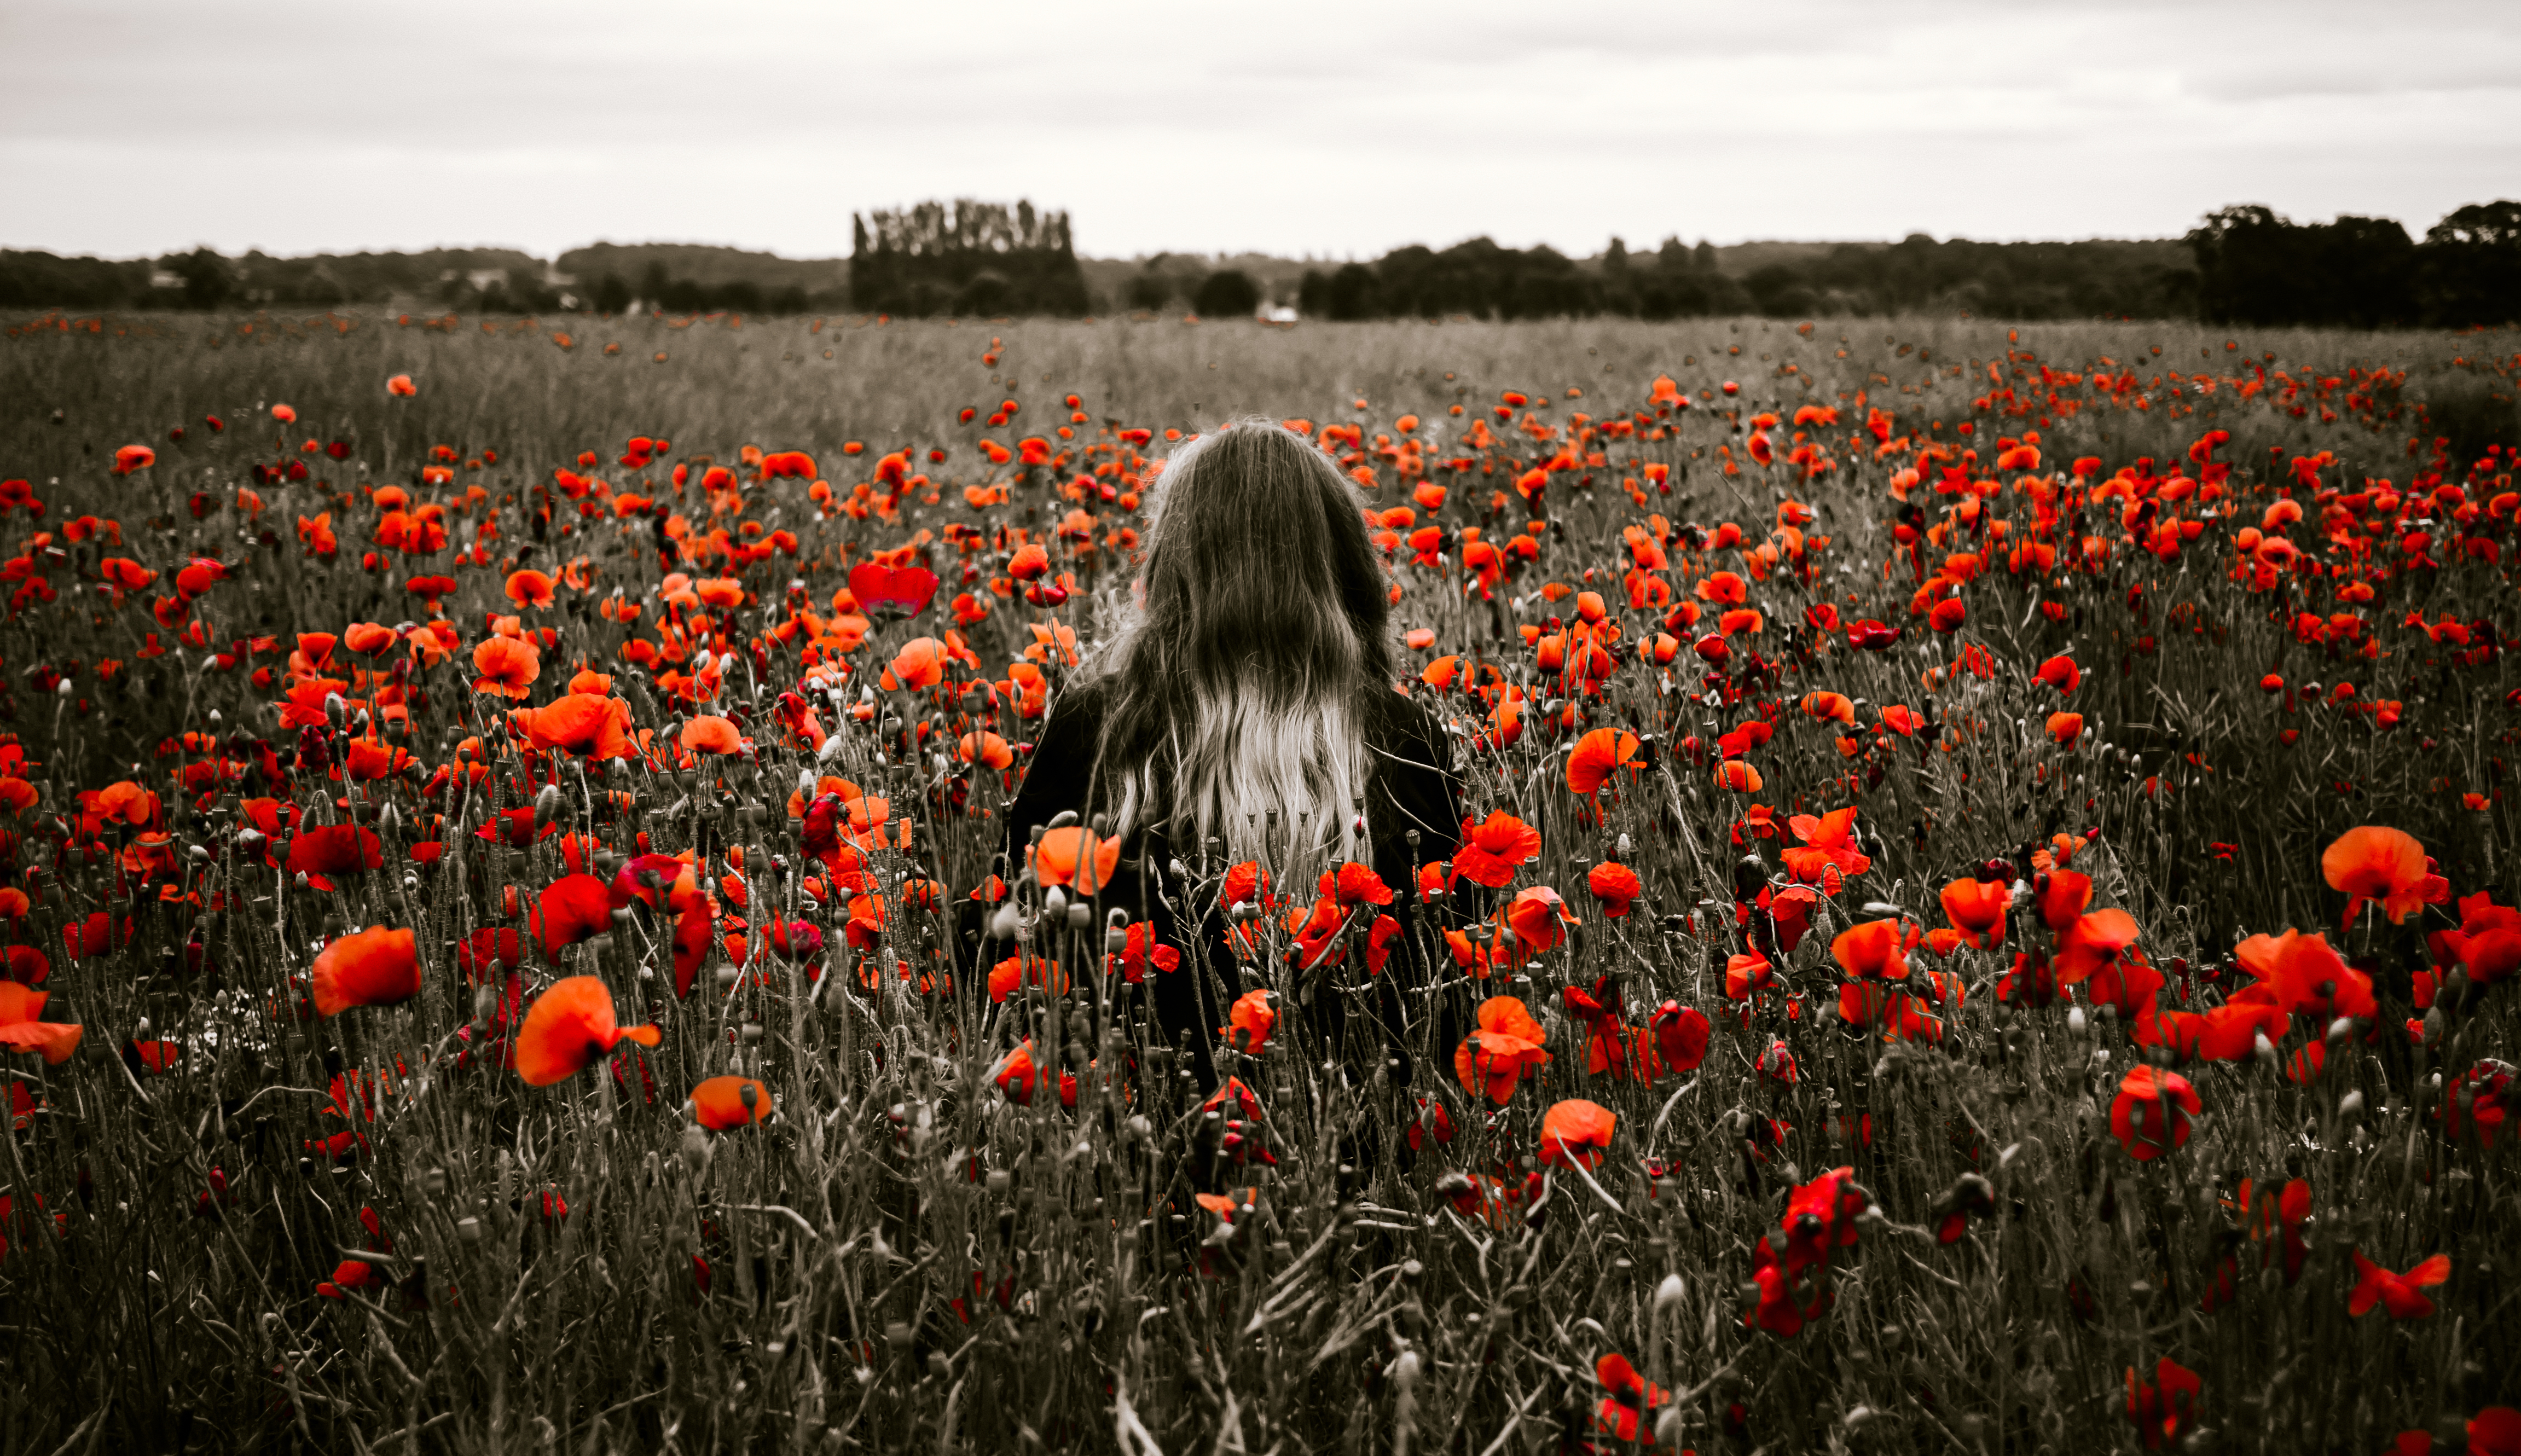 girl, flowers, poppies, nature, field wallpaper for mobile